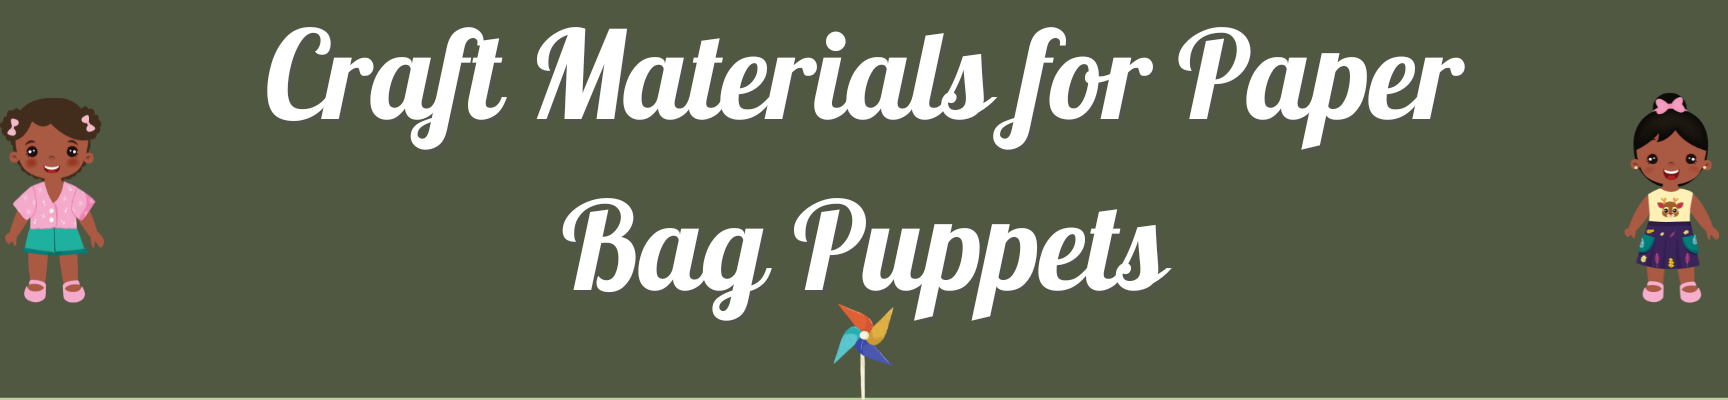 Craft Materials for Paper Bag Puppets